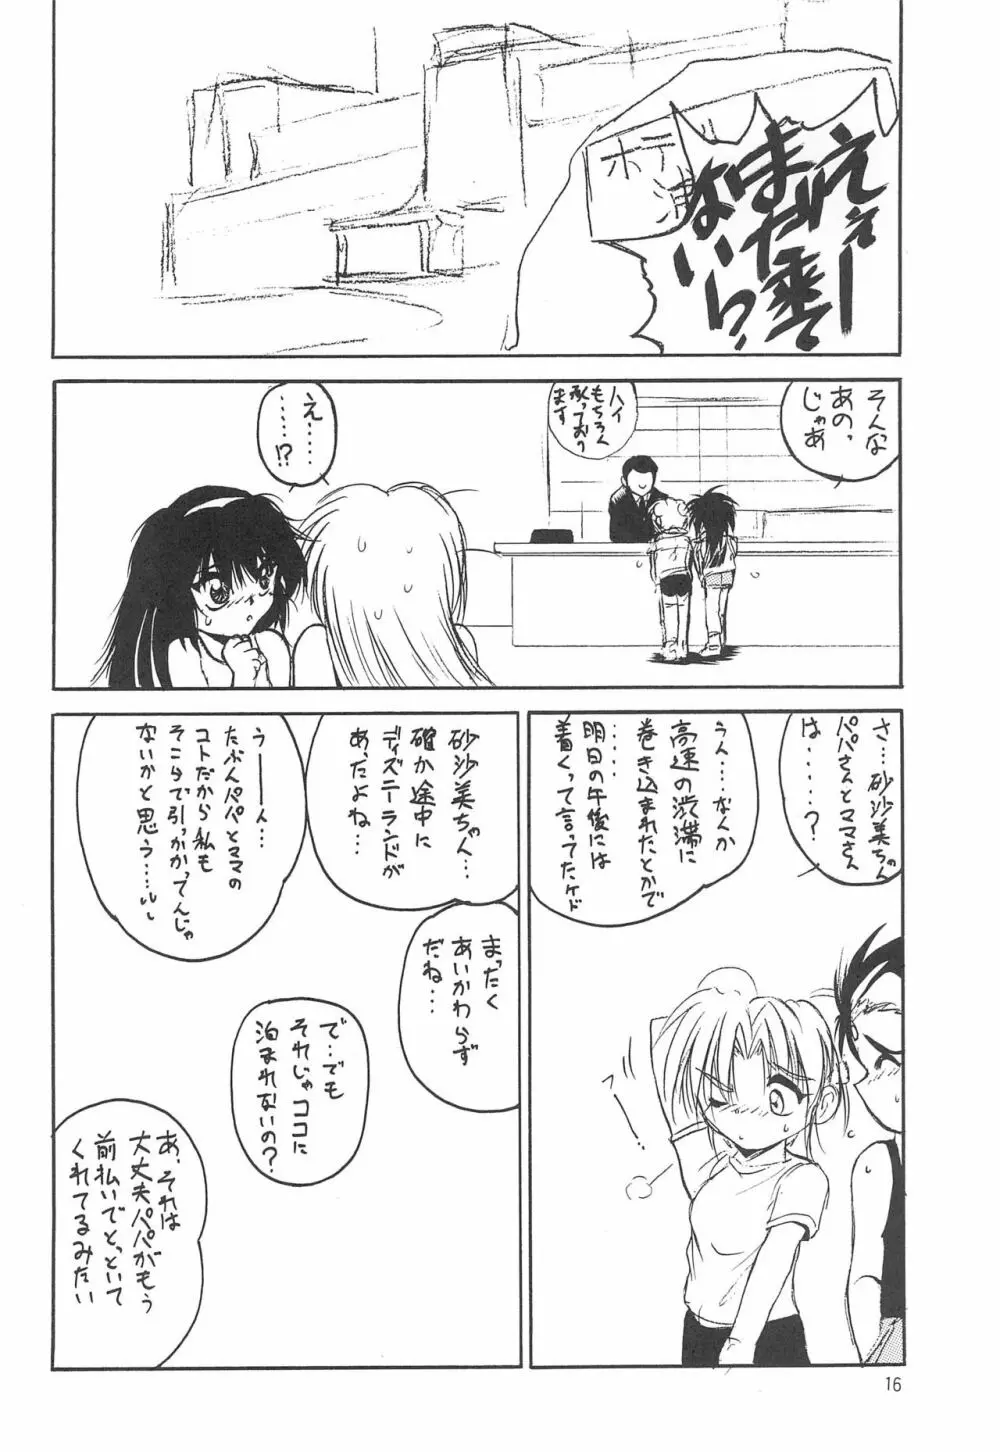 With Page.16